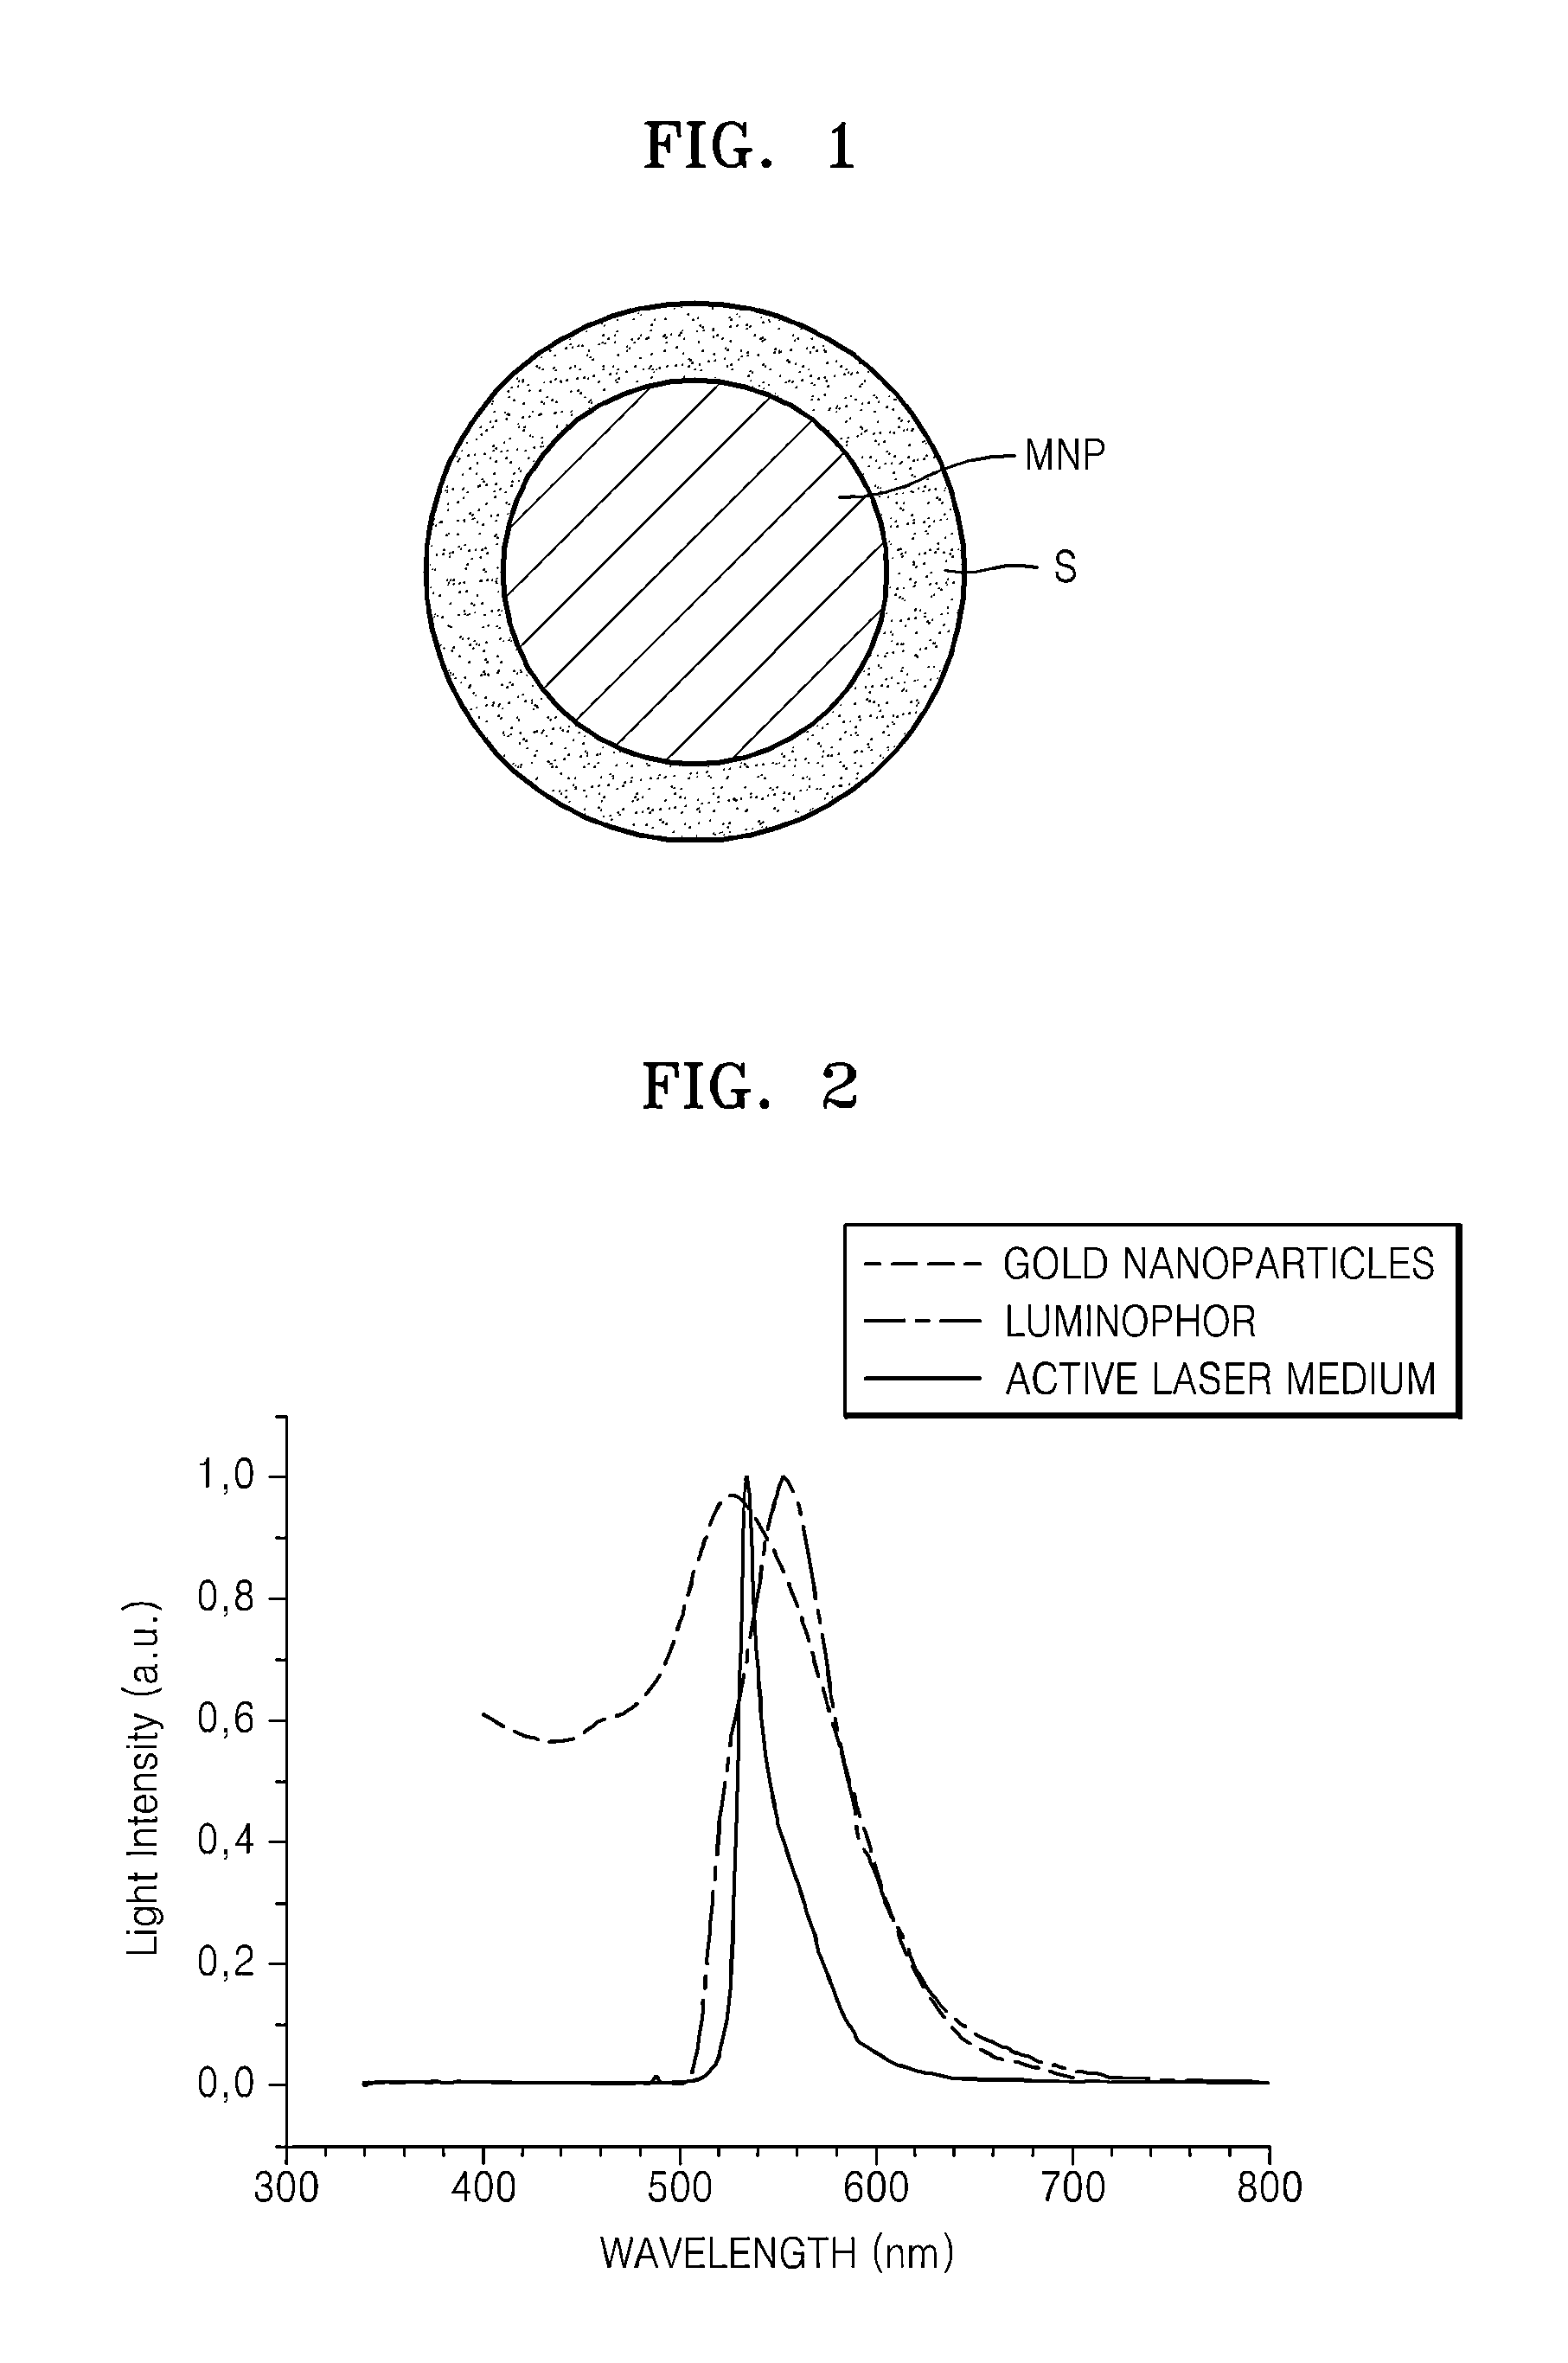 Active laser medium including nanoparticles, laser apparatus including the active laser medium, and method of manufacturing nanoparticles